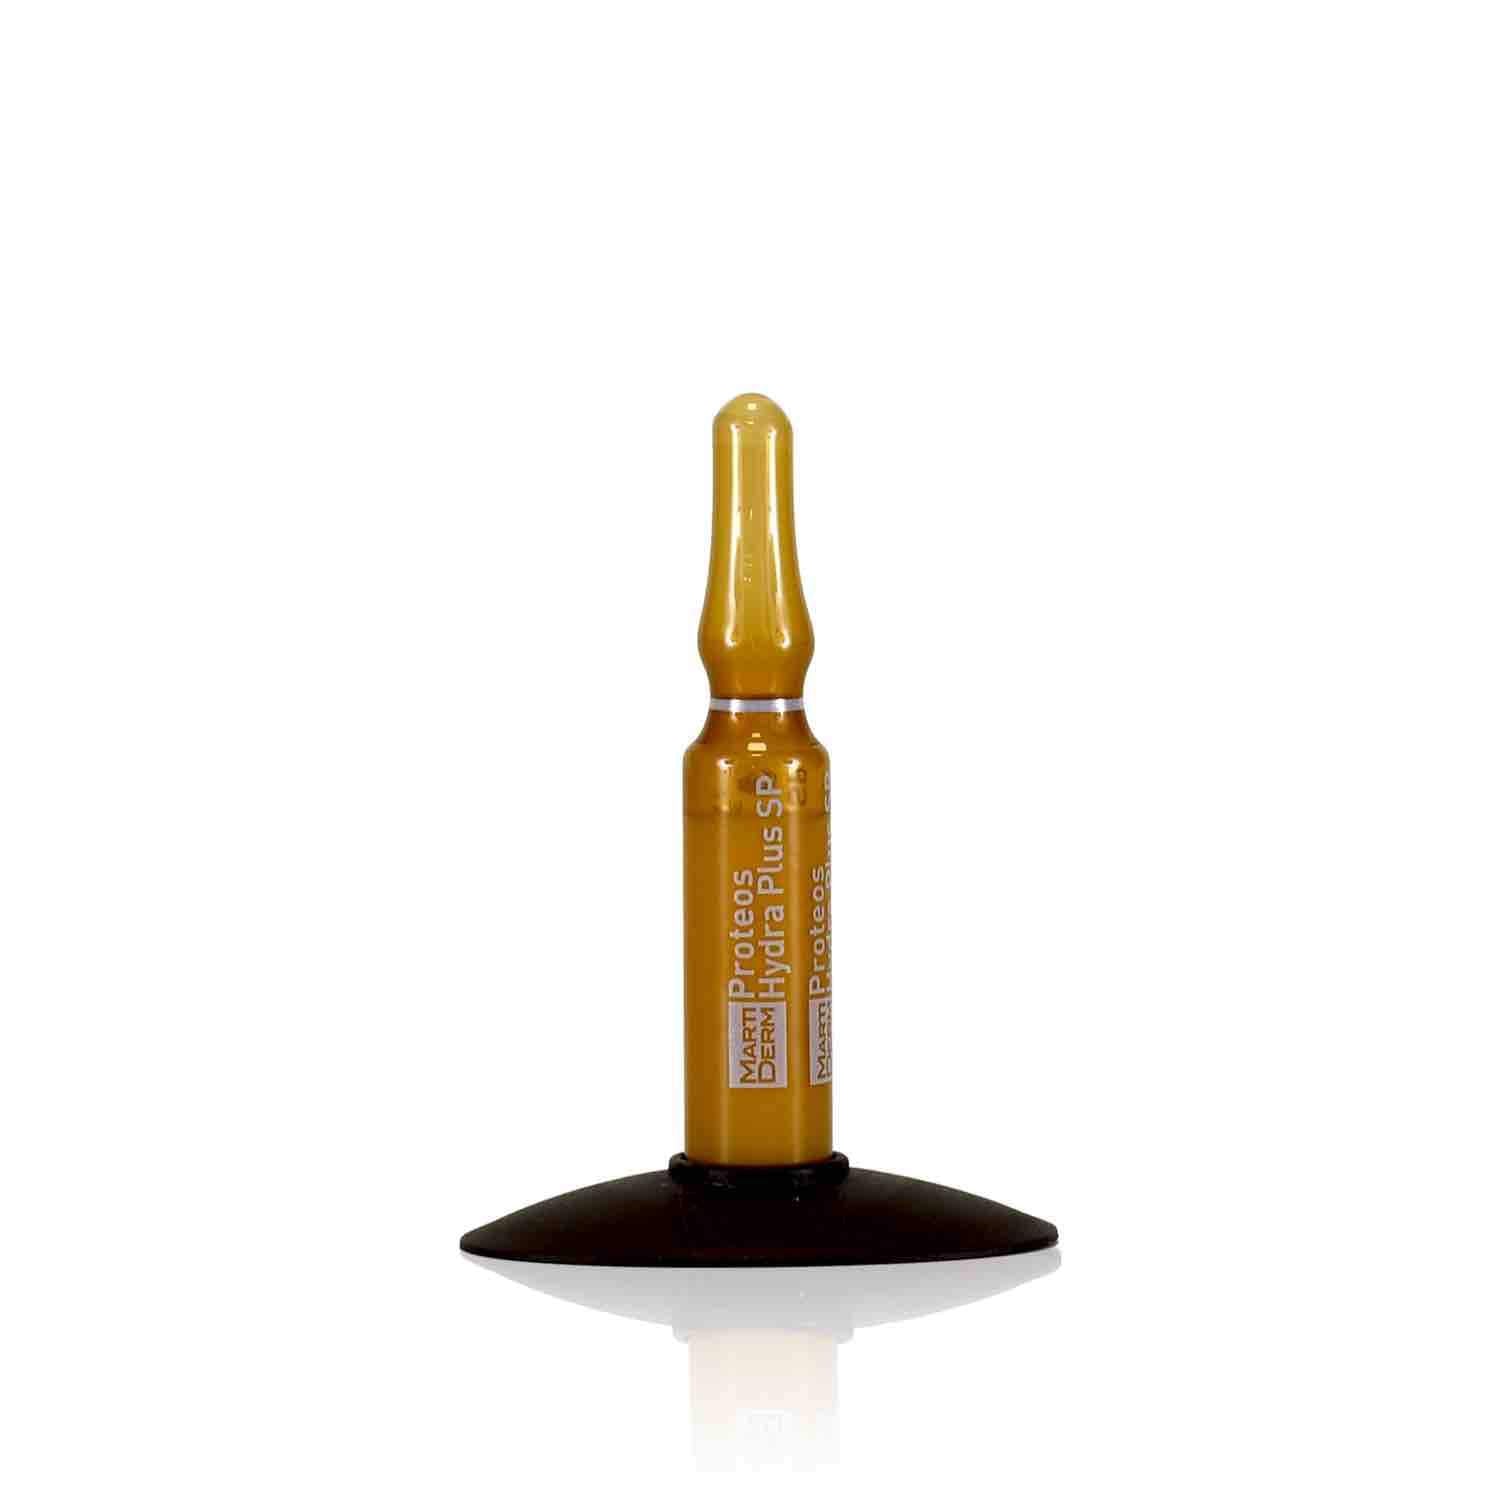 Shop Proteos Hydra Plus SP 30 Ampoules from Martiderm on SublimeLife.in. Best for moisturising and brightening skin.